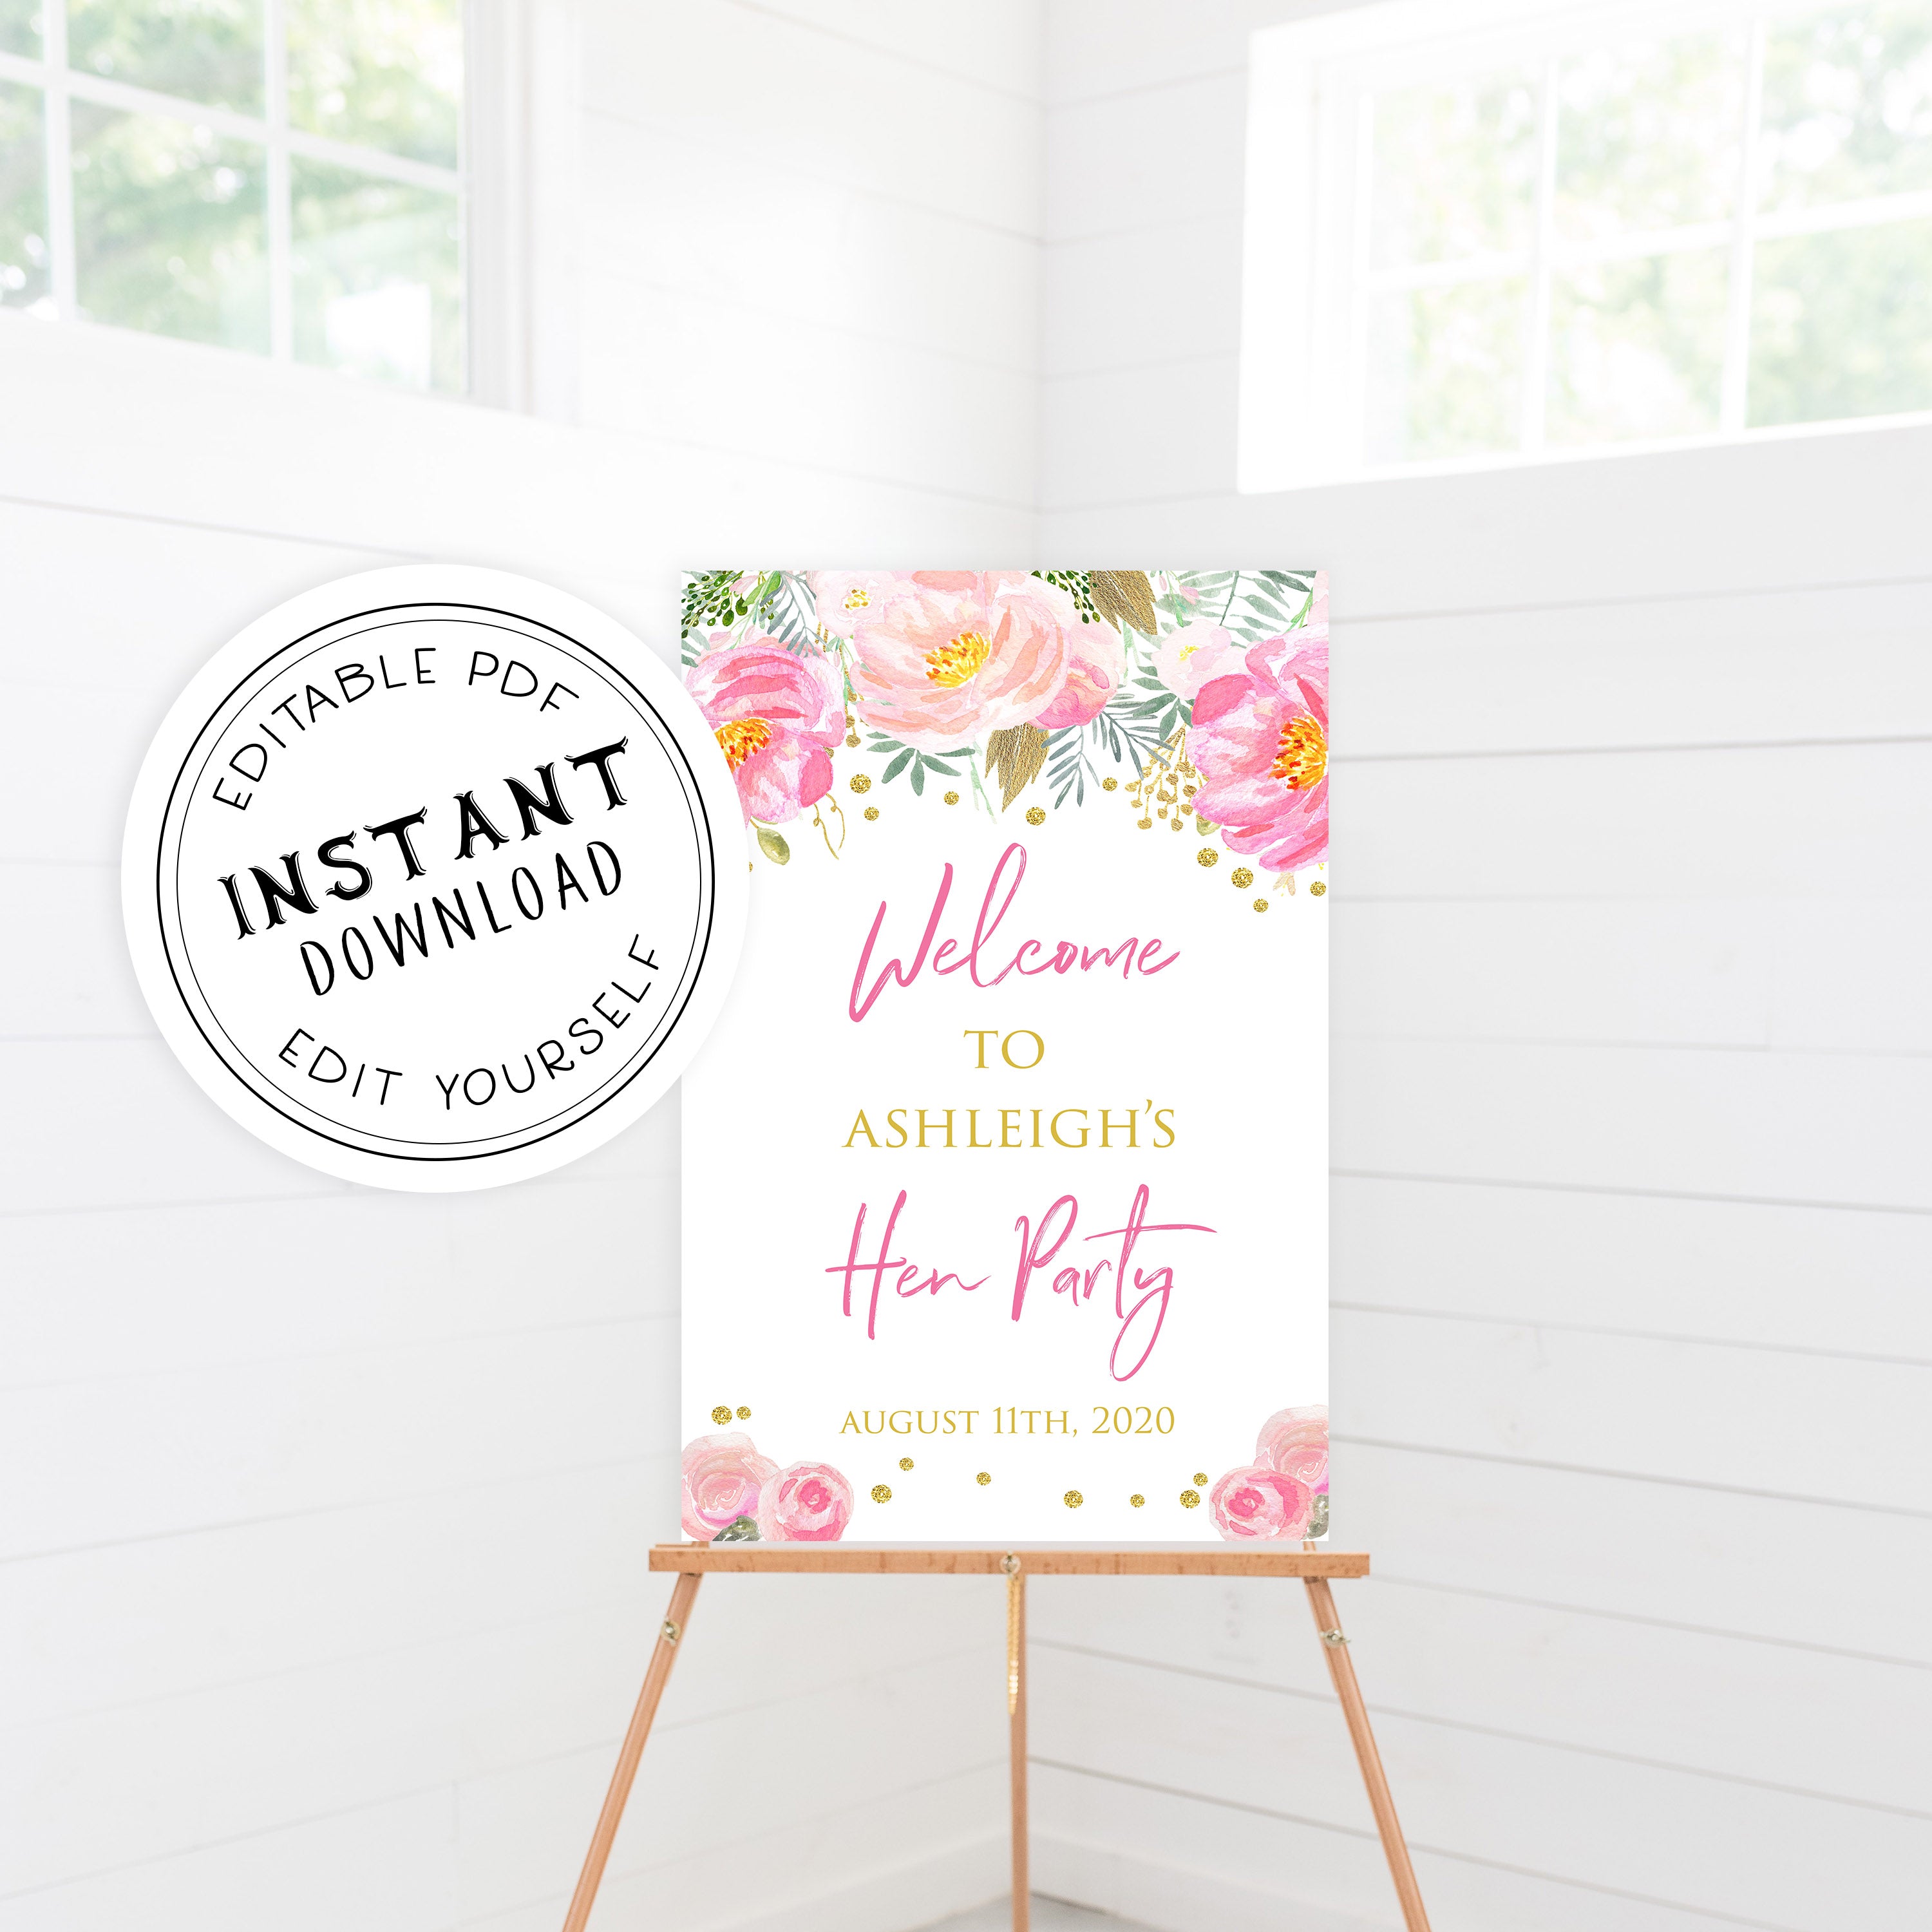 Hen party welcome sign, printable bridal shower games, blush floral bridal shower games, fun bridal shower games